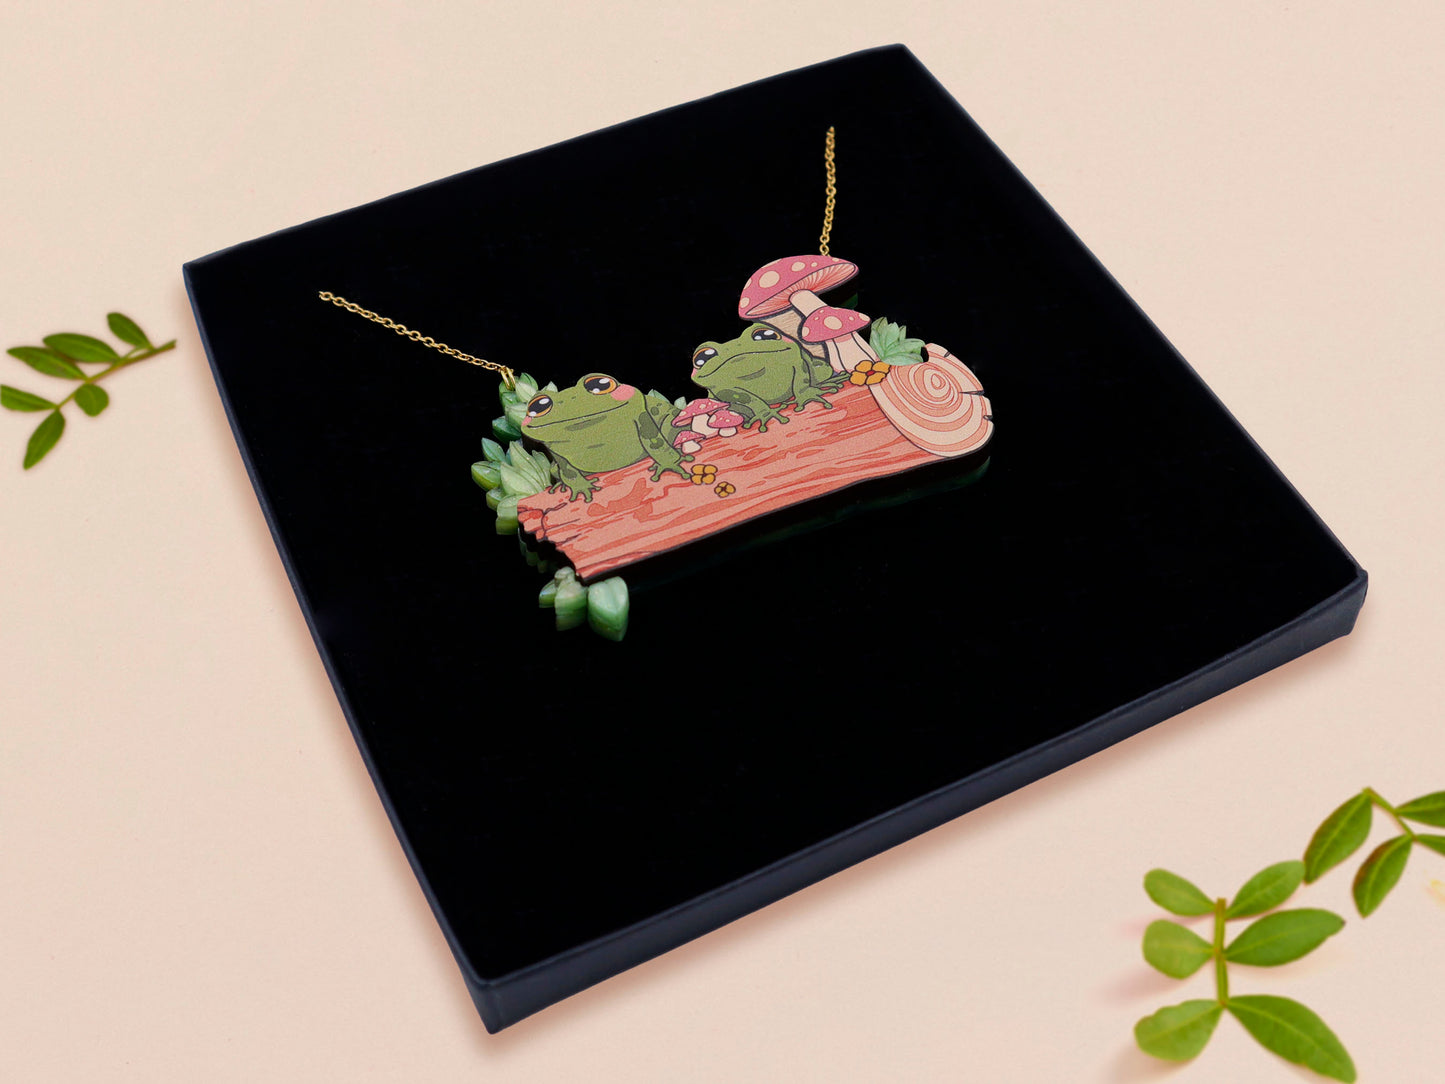 A wooden and glitter acrylic necklace with gold chain in a black box of two cute frogs sat on a log smiling surrounded by flowers, plants and mushrooms